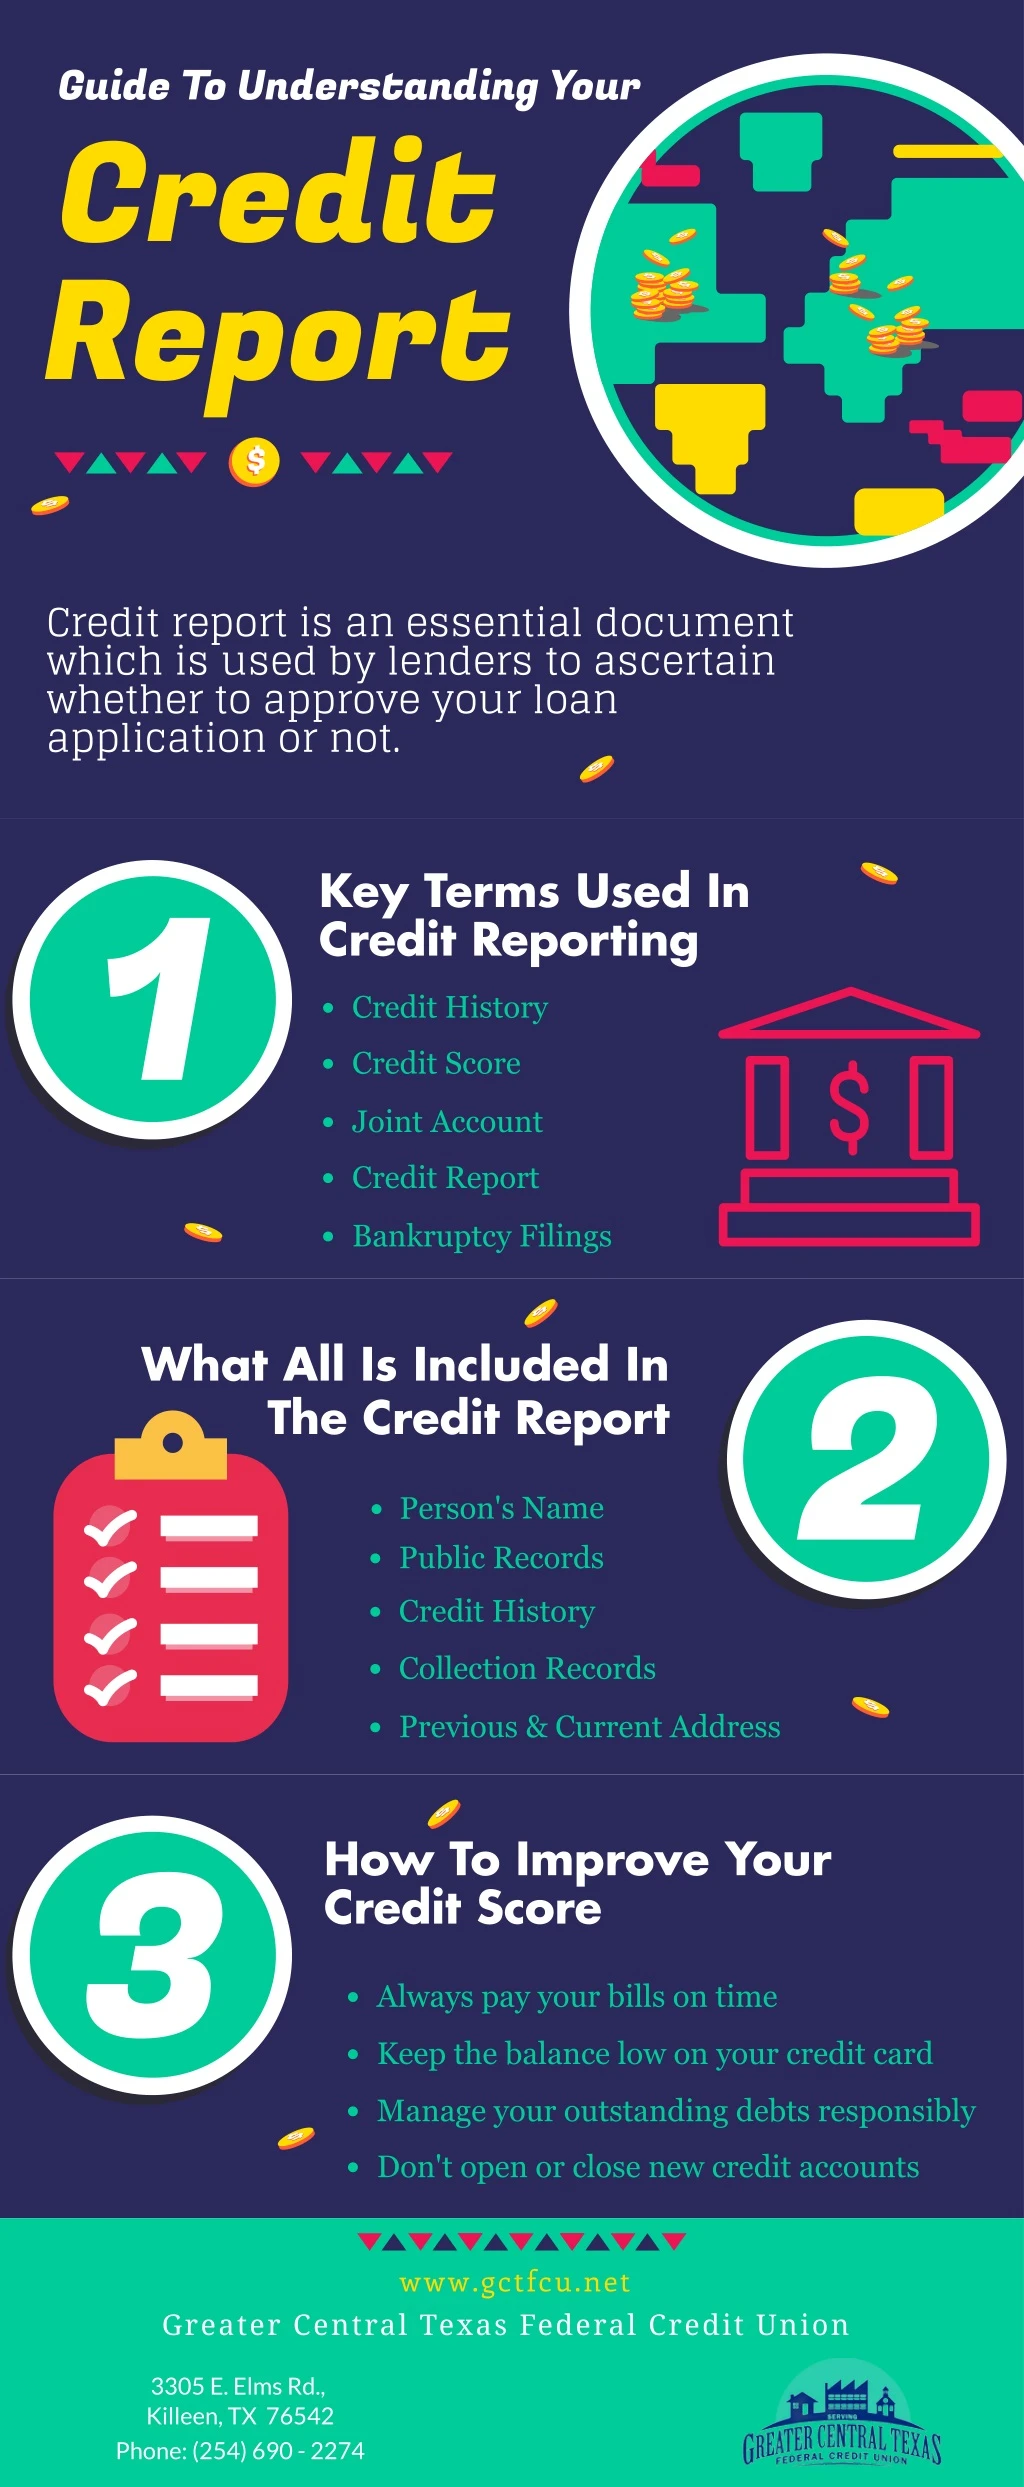 PPT - Guide To Understanding Your Credit Report PowerPoint Presentation ...